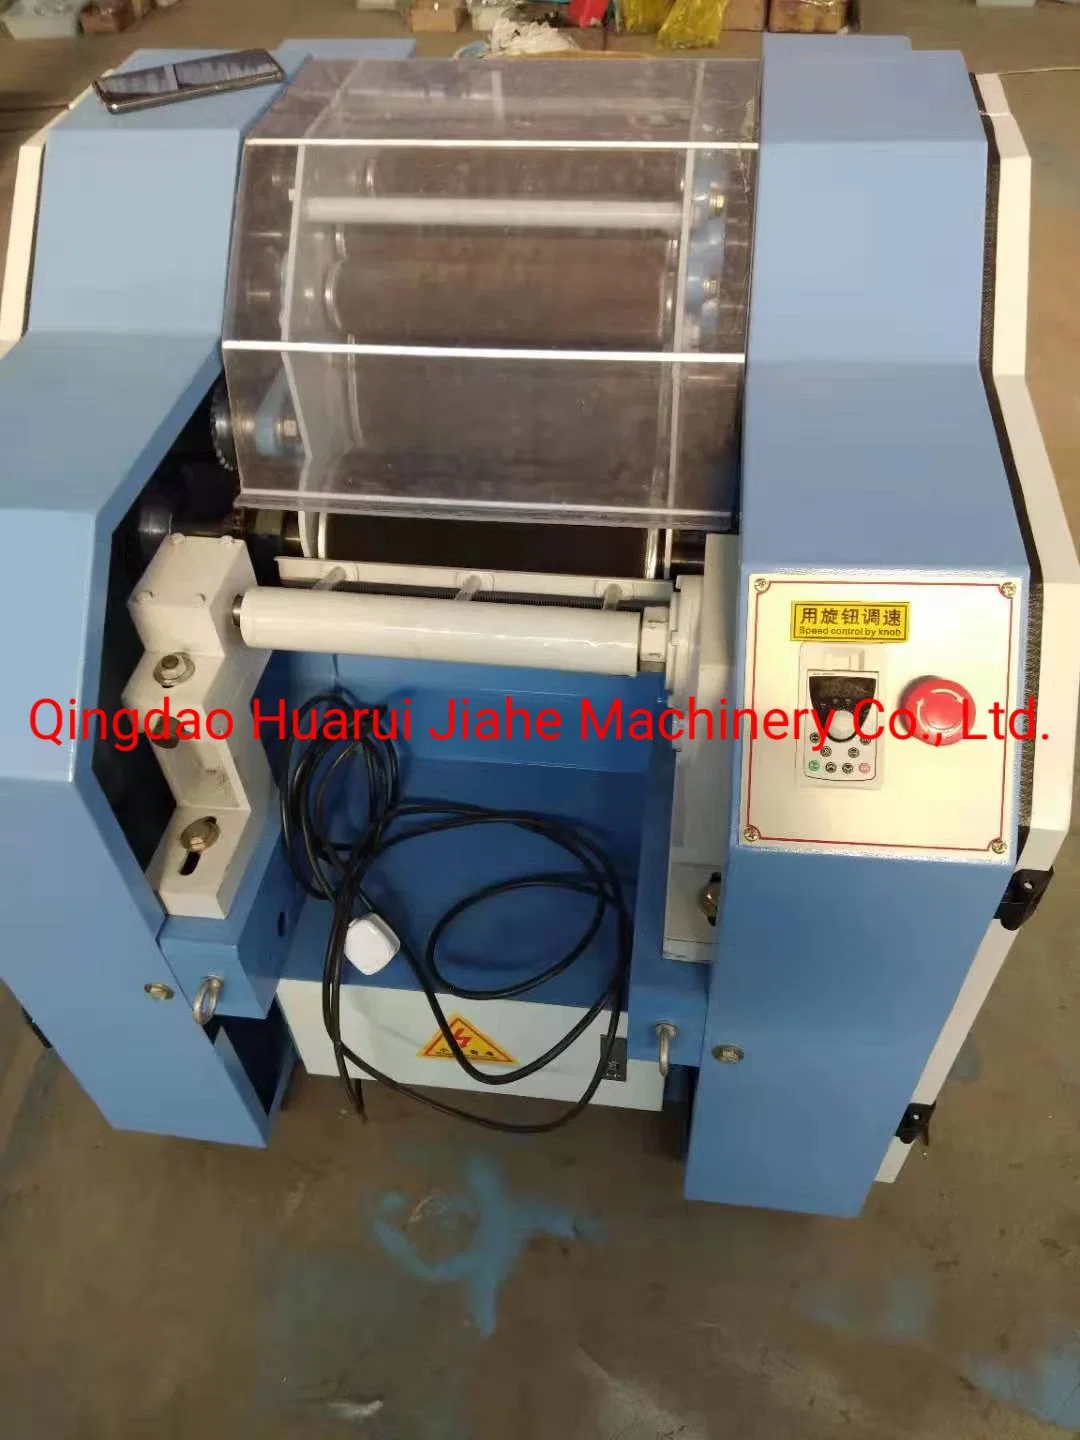 Supply of Small Textile Prototype-Fast Spinning System-Small Spinning Prototype